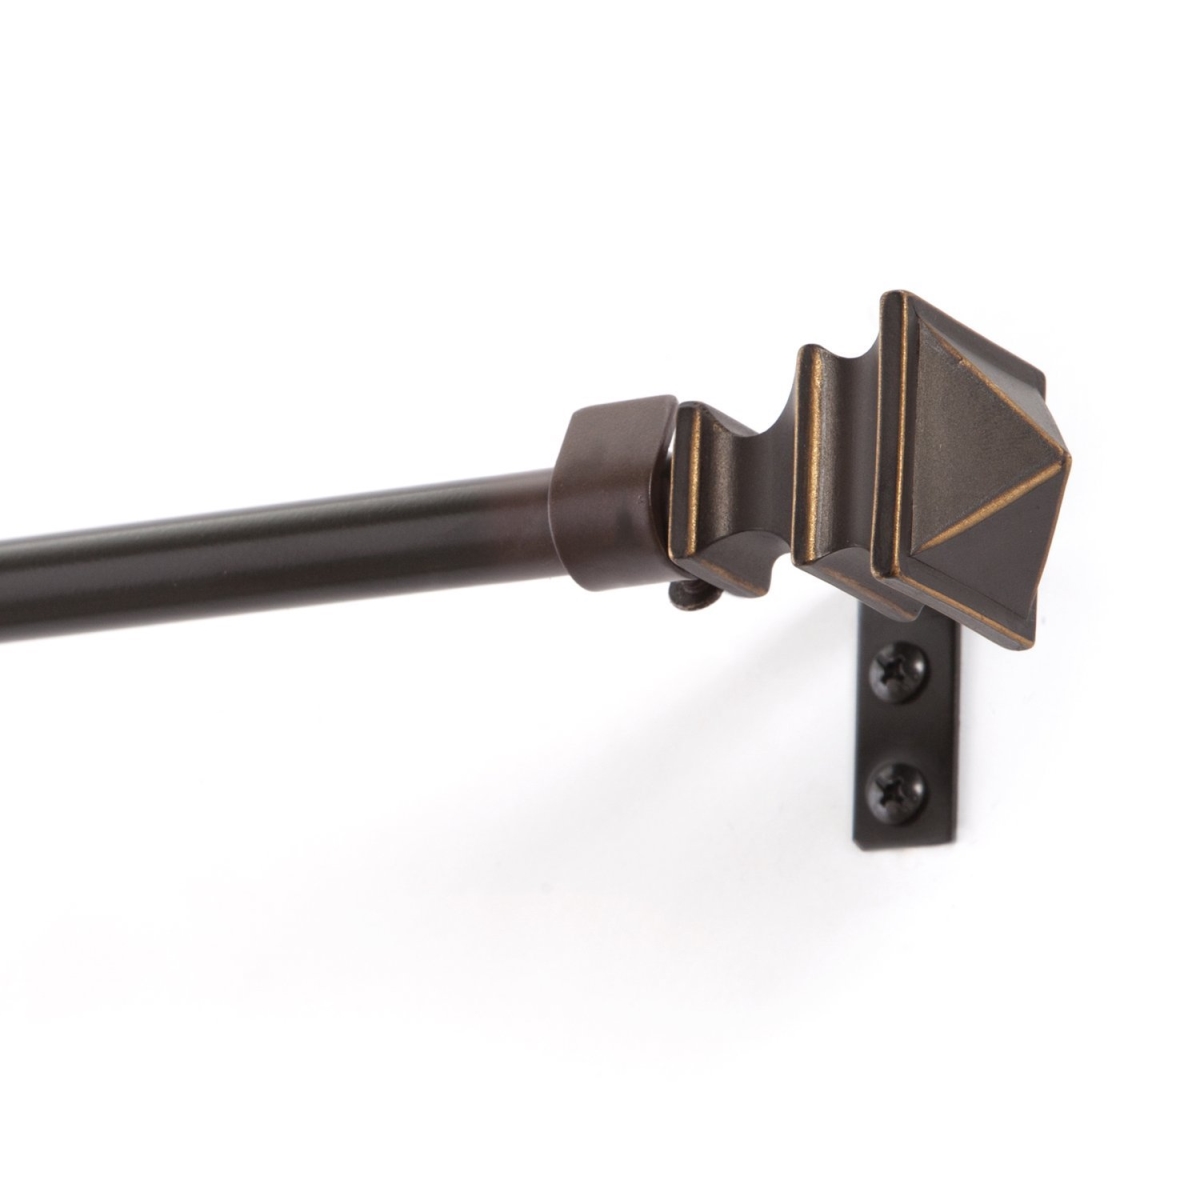 32-lwf1005-2orb 48-88 In. Painted Oil Rubbed Bronze Finish Single Rod Window Hardware With Knob Resin Finial